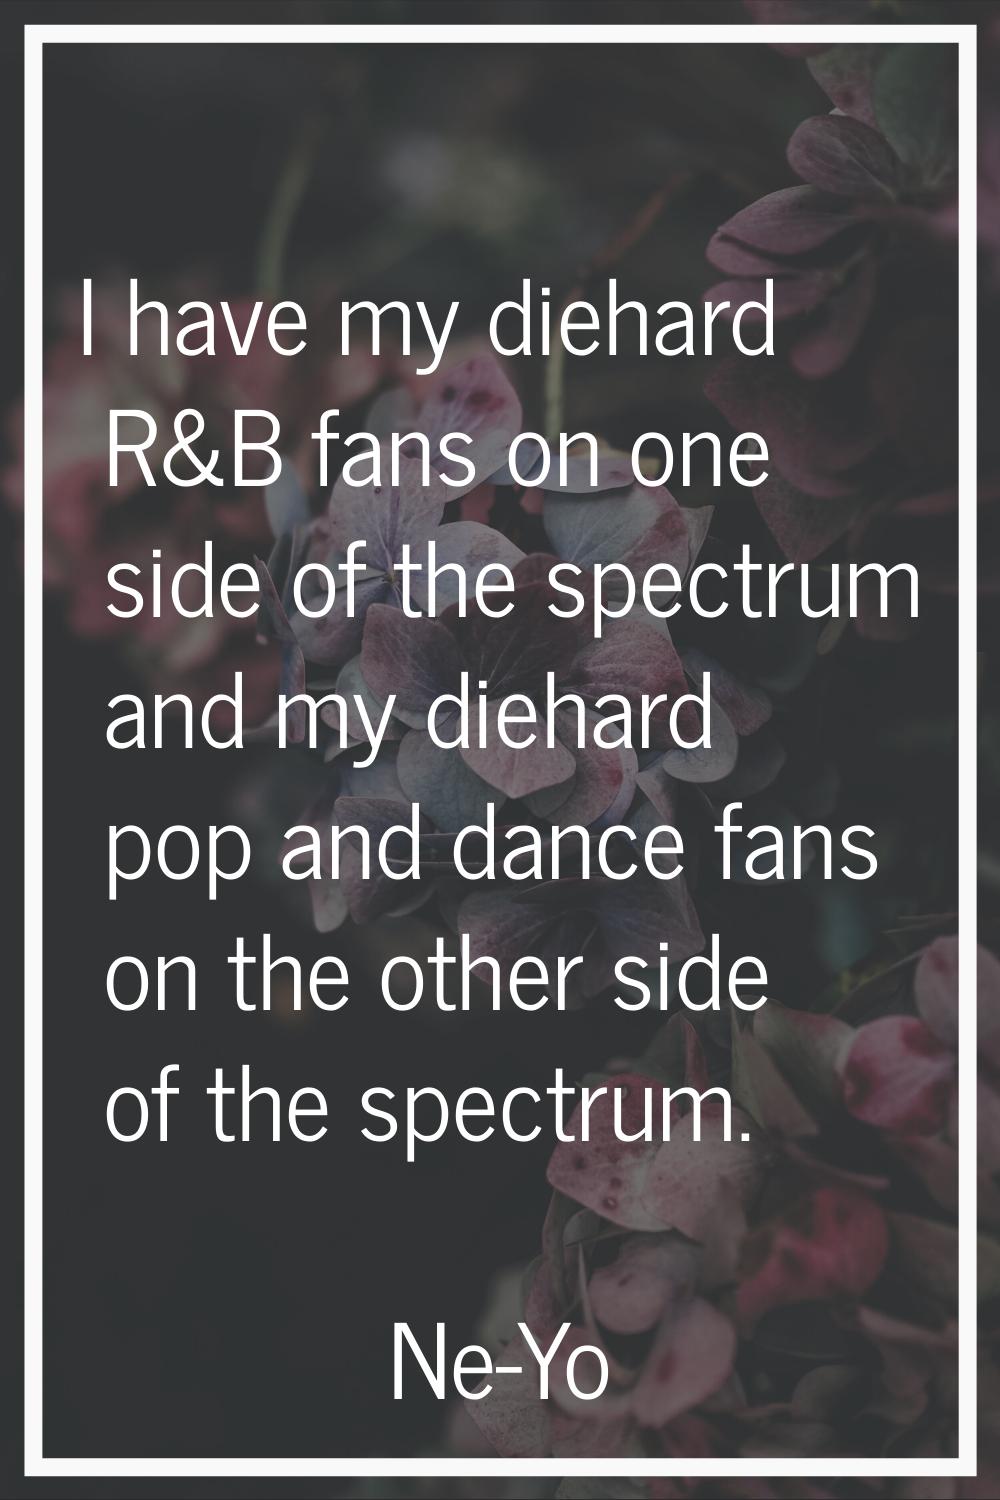 I have my diehard R&B fans on one side of the spectrum and my diehard pop and dance fans on the oth